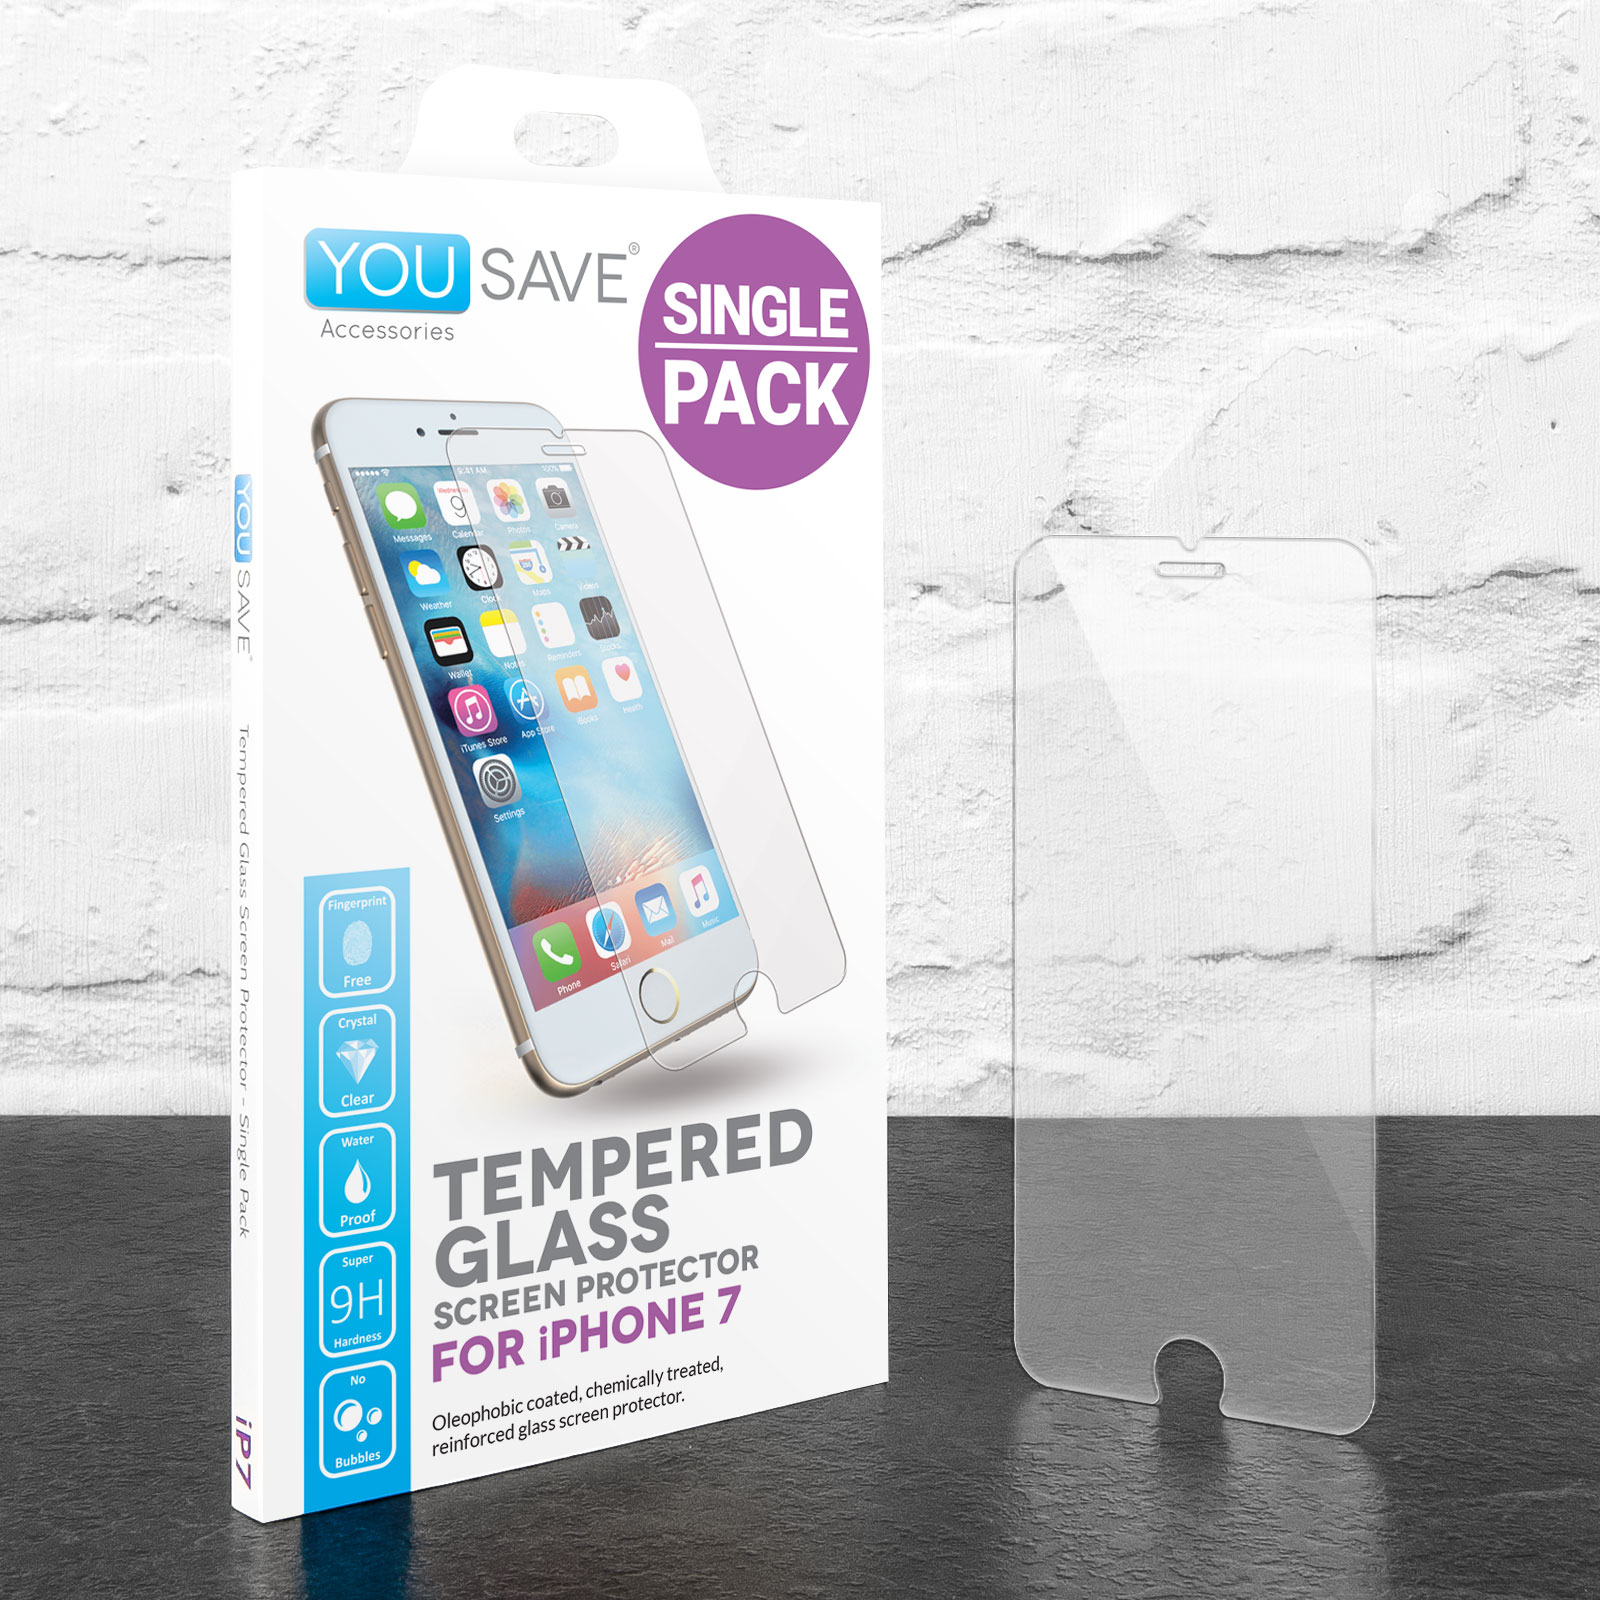 Yousave Accessories iPhone 7 Glass Screen Protector